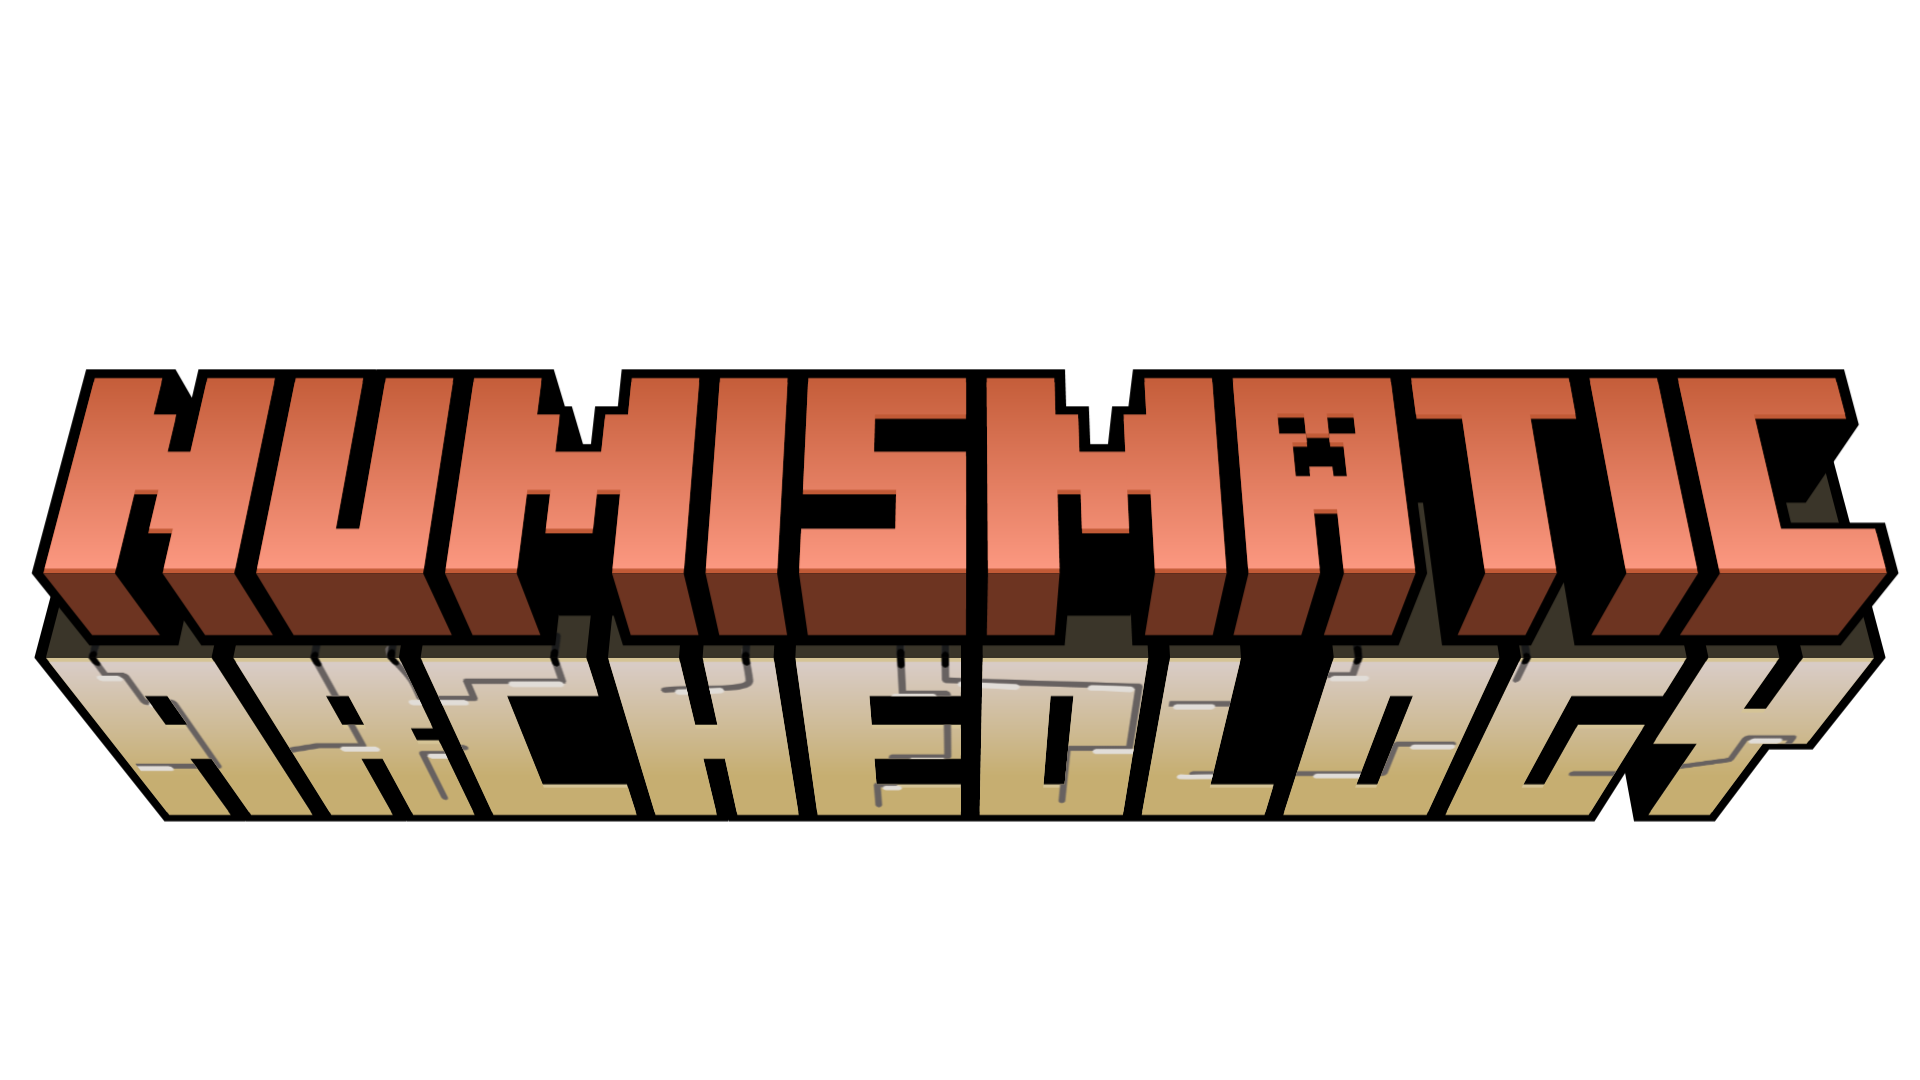 Numismatic Archeology logo stylized in Minecraft font with coins below